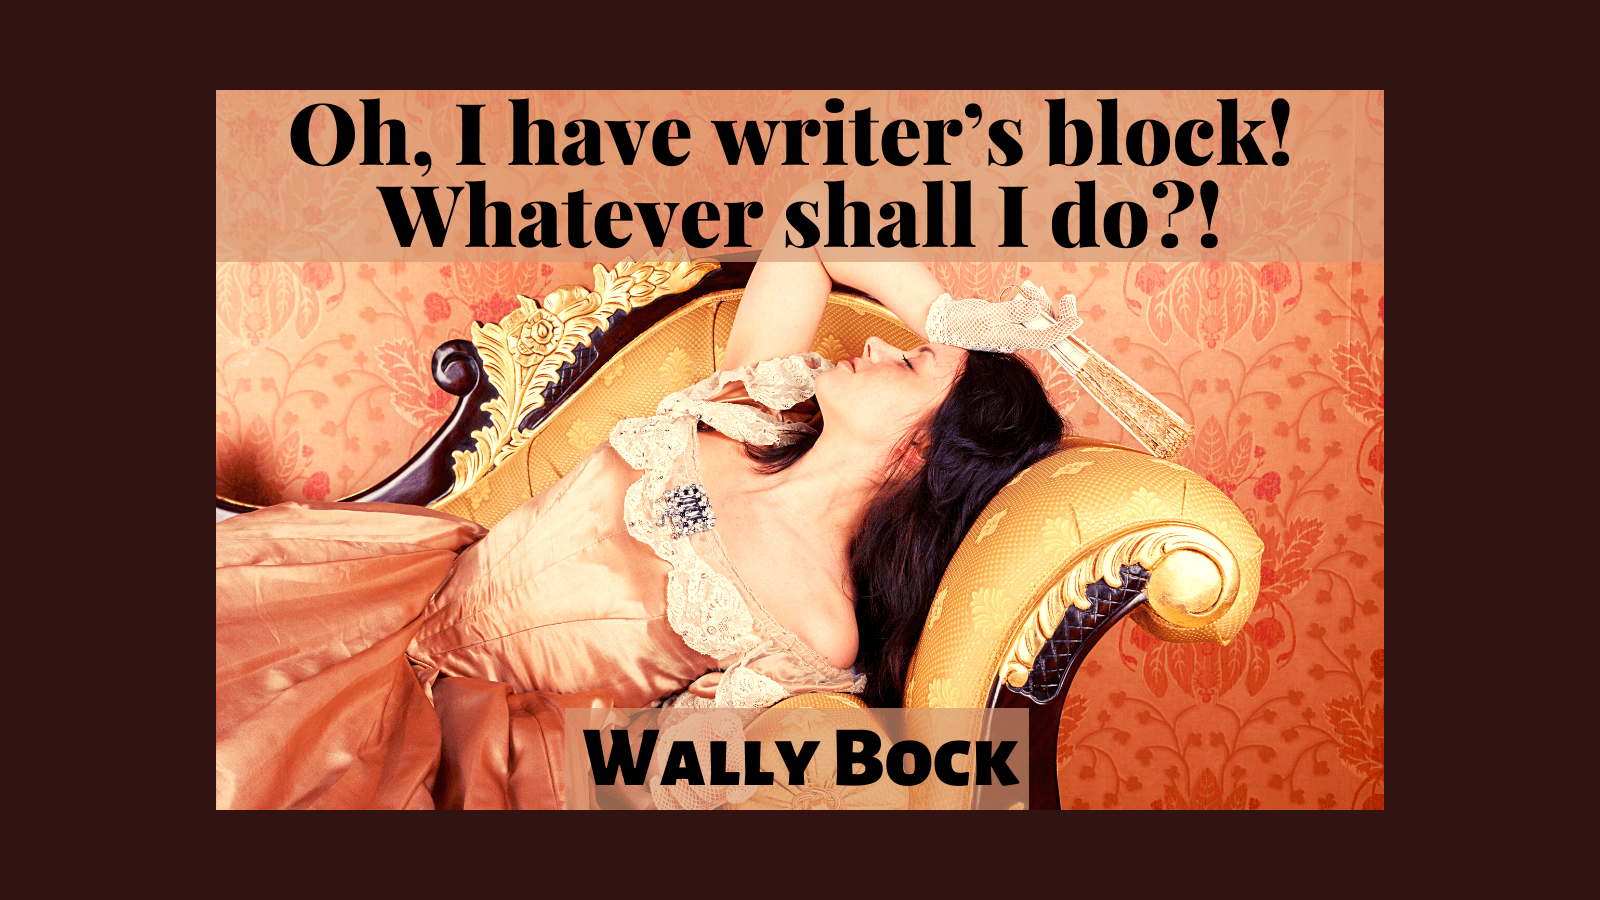 Oh, I have writer’s block! Whatever shall I do?!